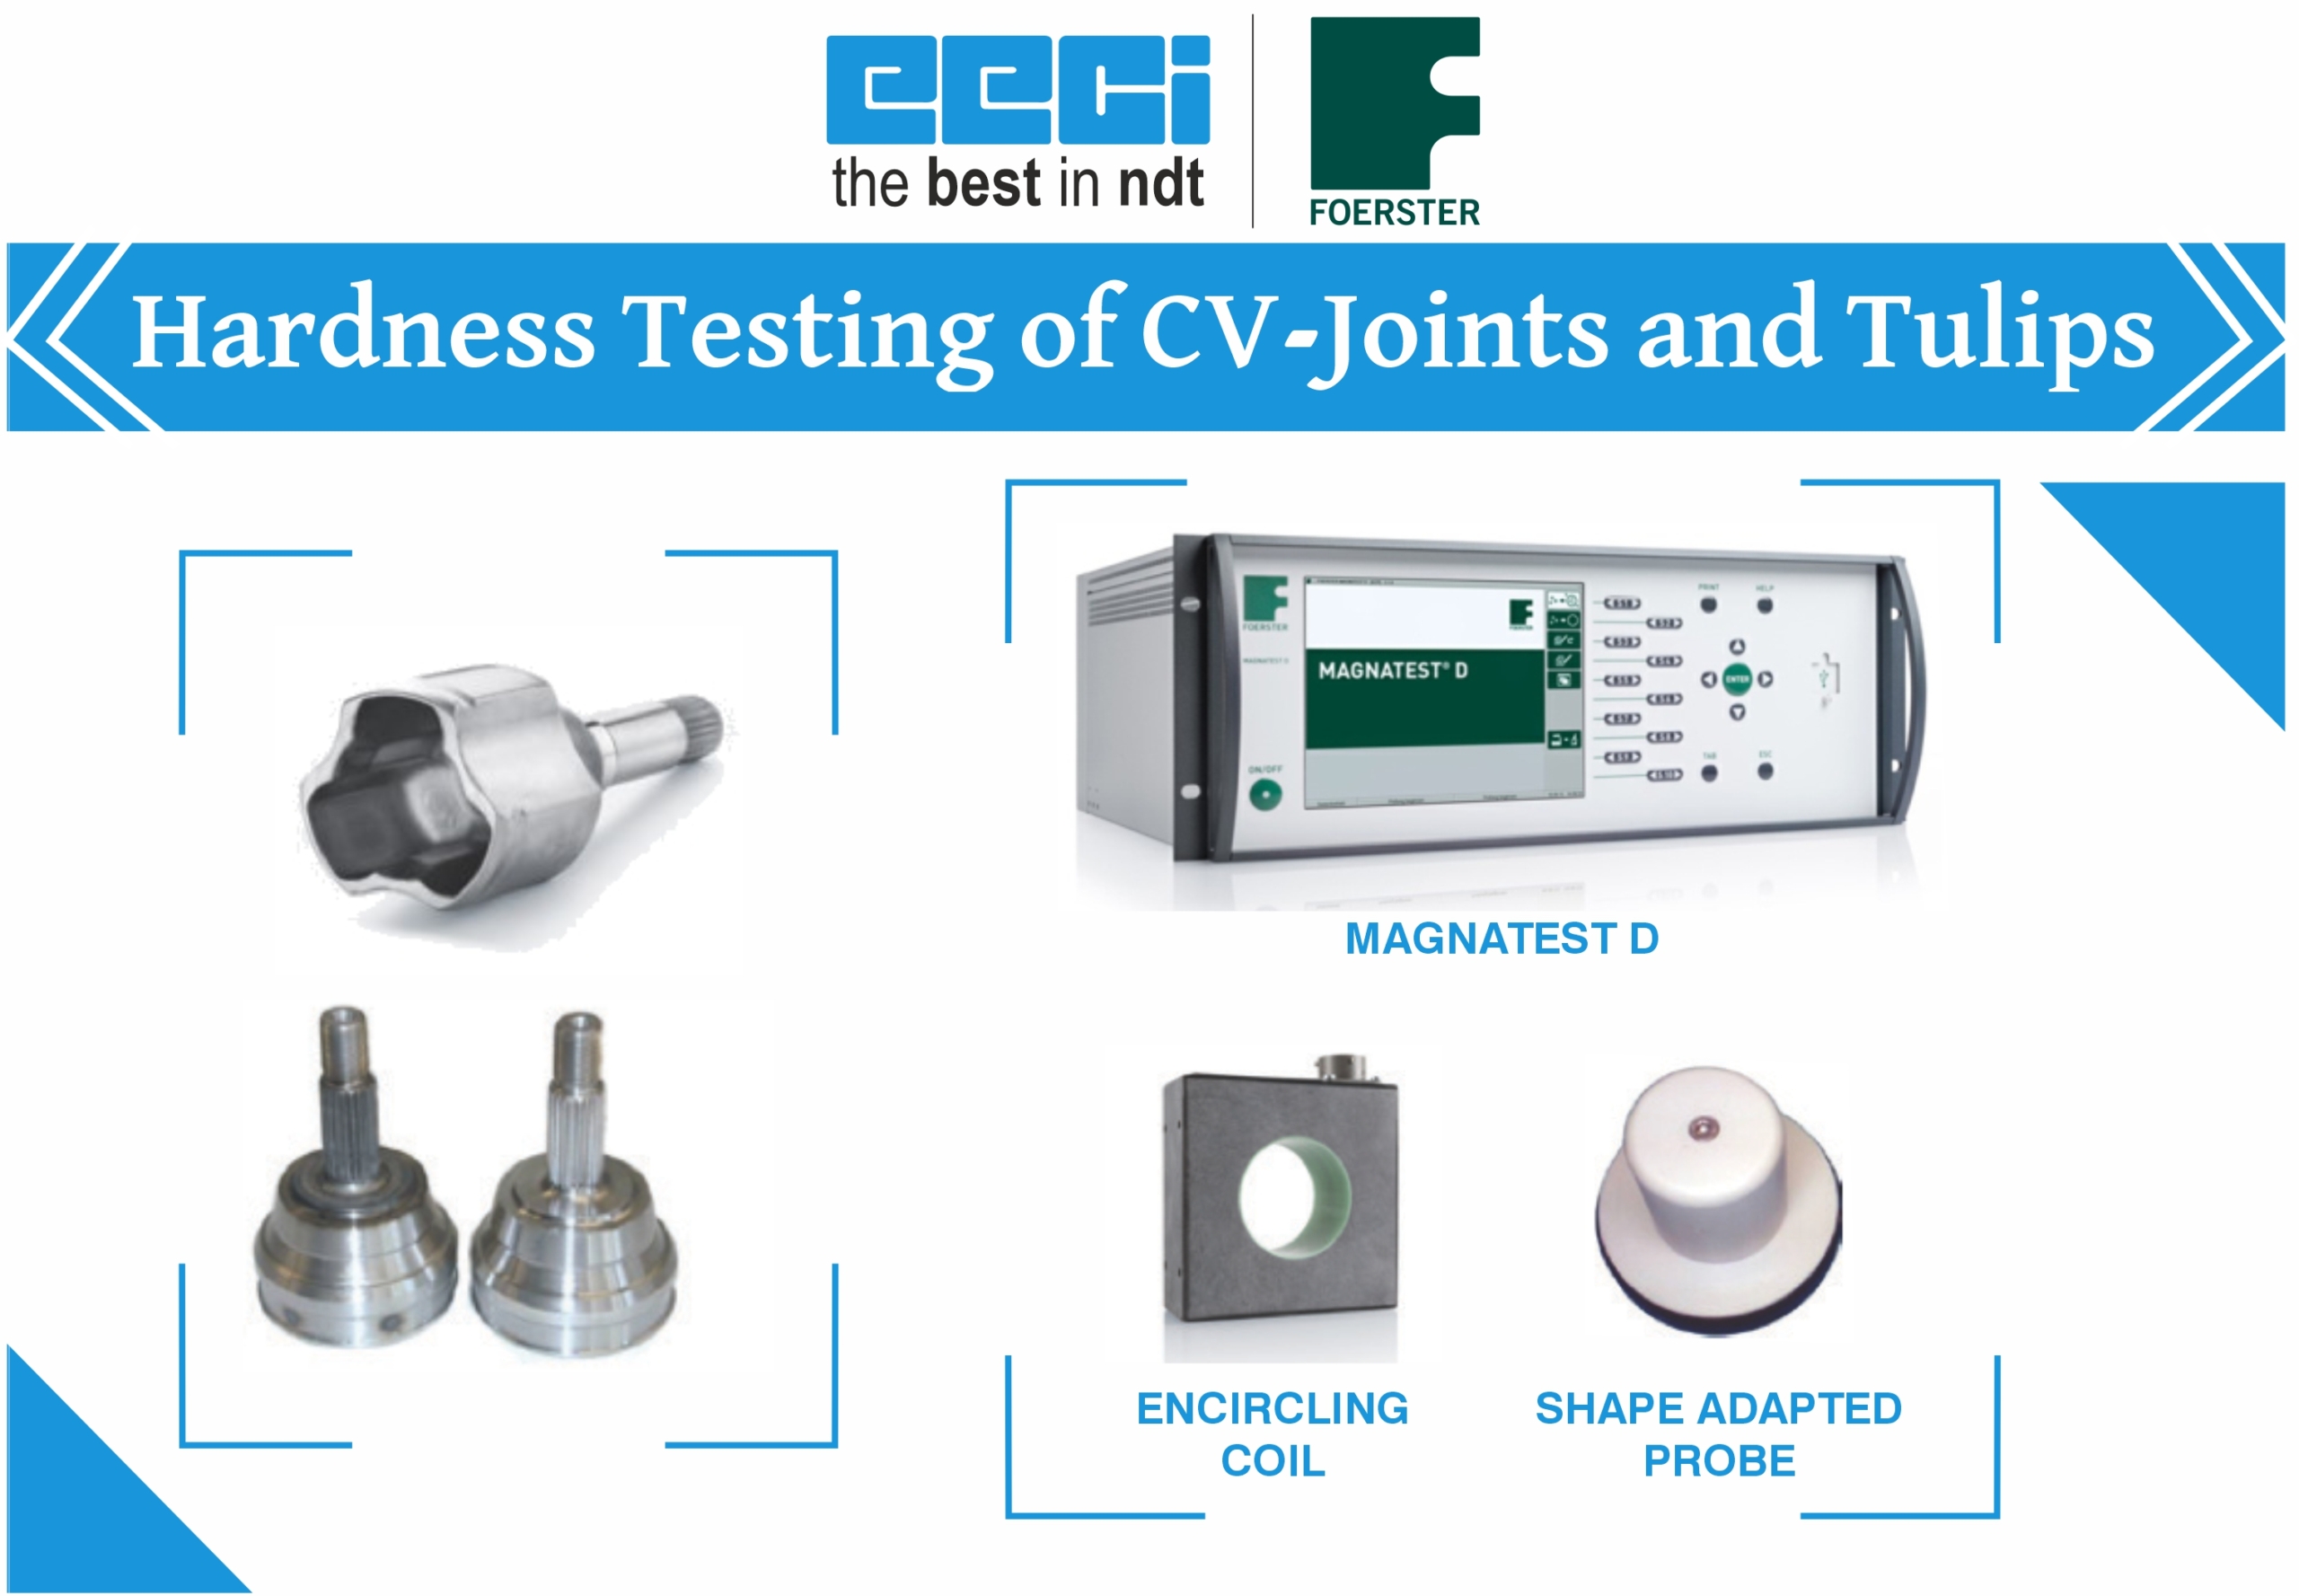 Hardness Testing of CV-Joints and Tulips